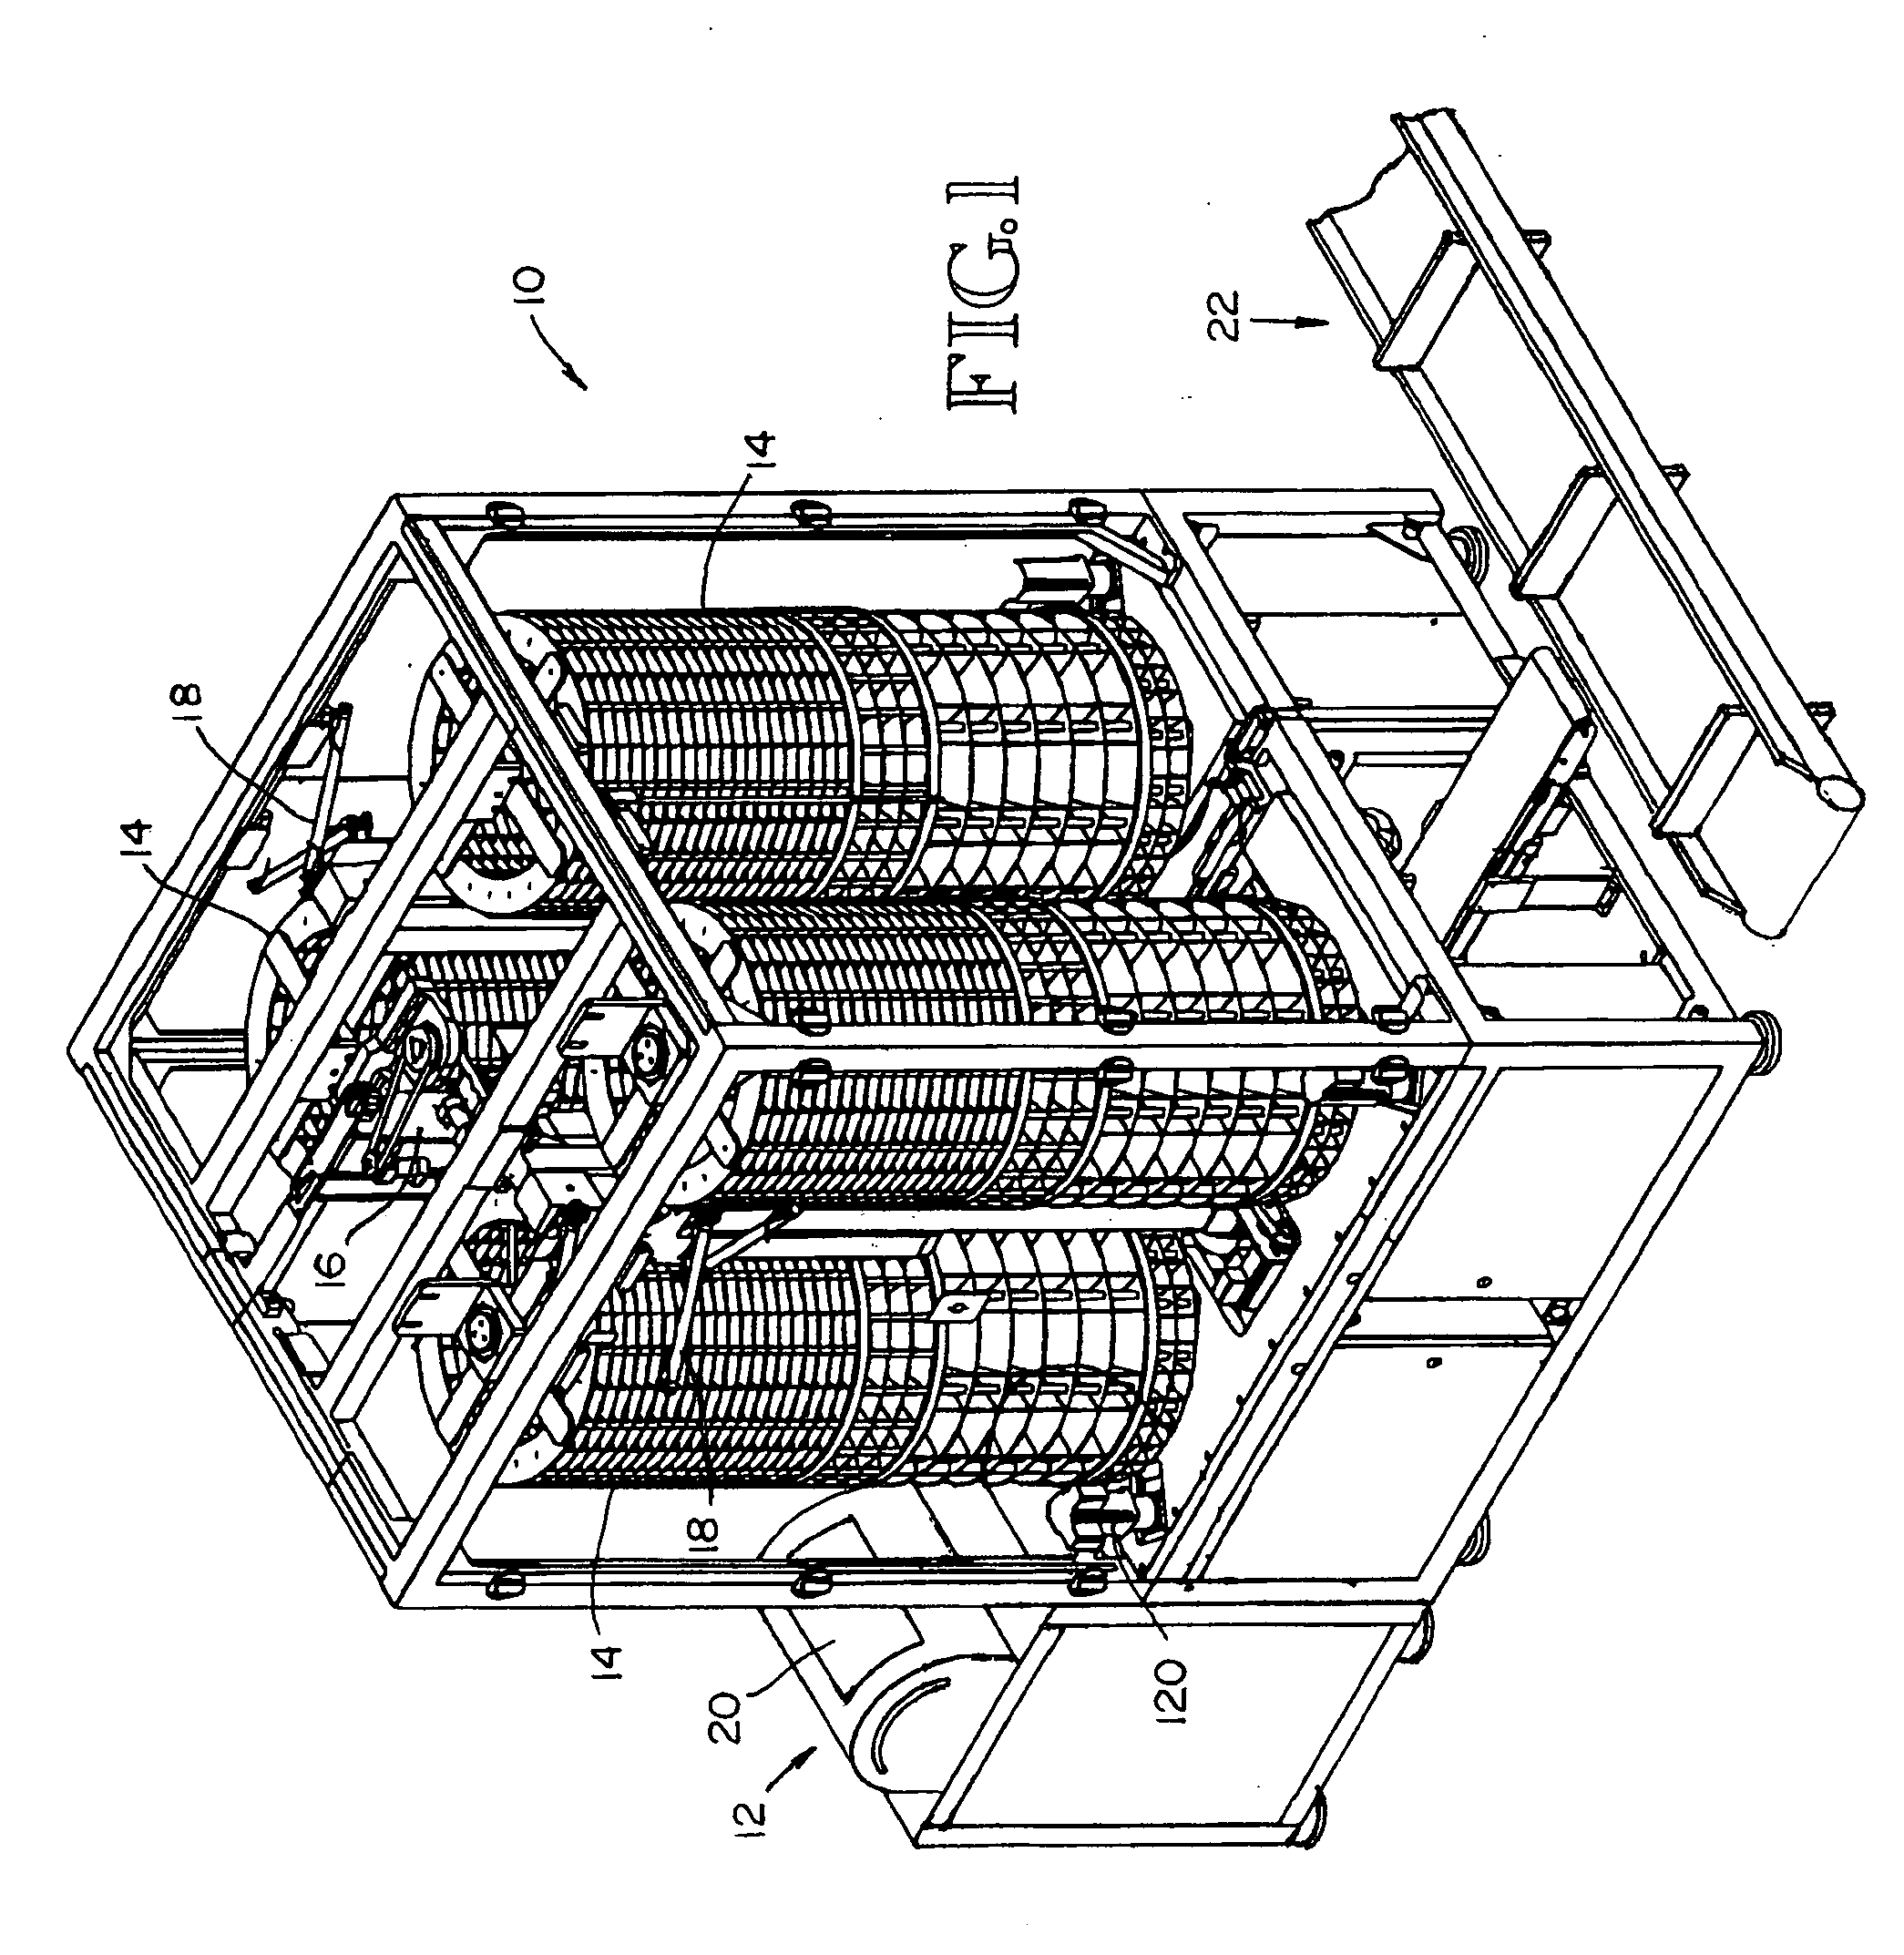 Automatic apparatus for storing and dispensing packaged medication and other small elements